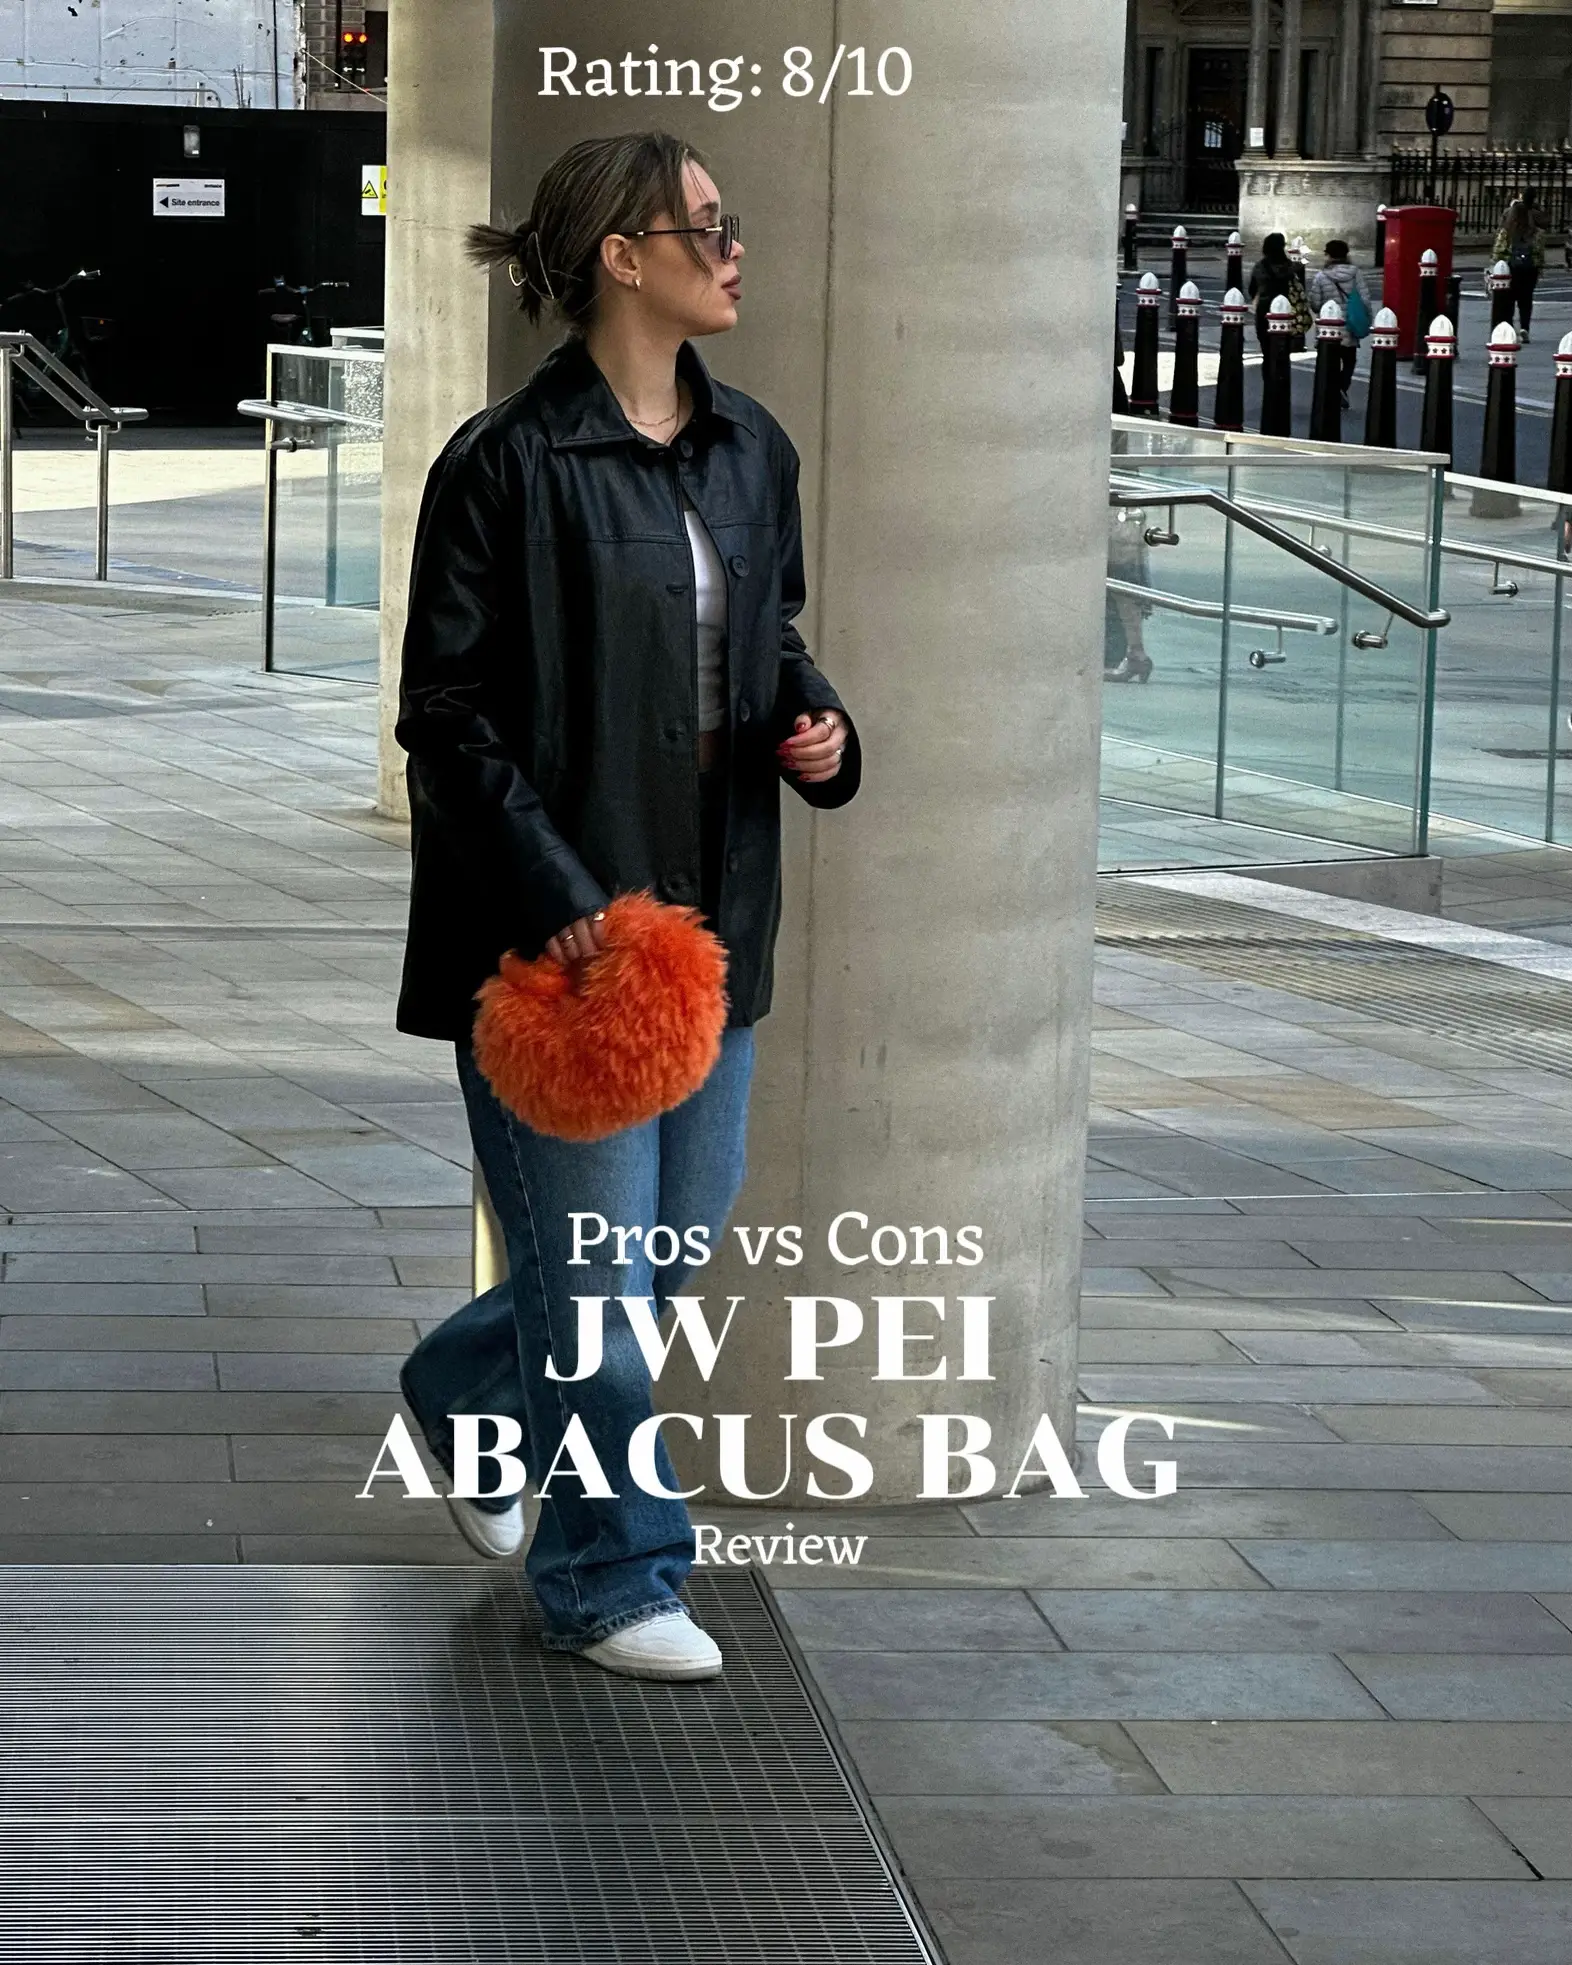 ABACUS FAUX BAG: Review 🍊, Gallery posted by daniienogueira